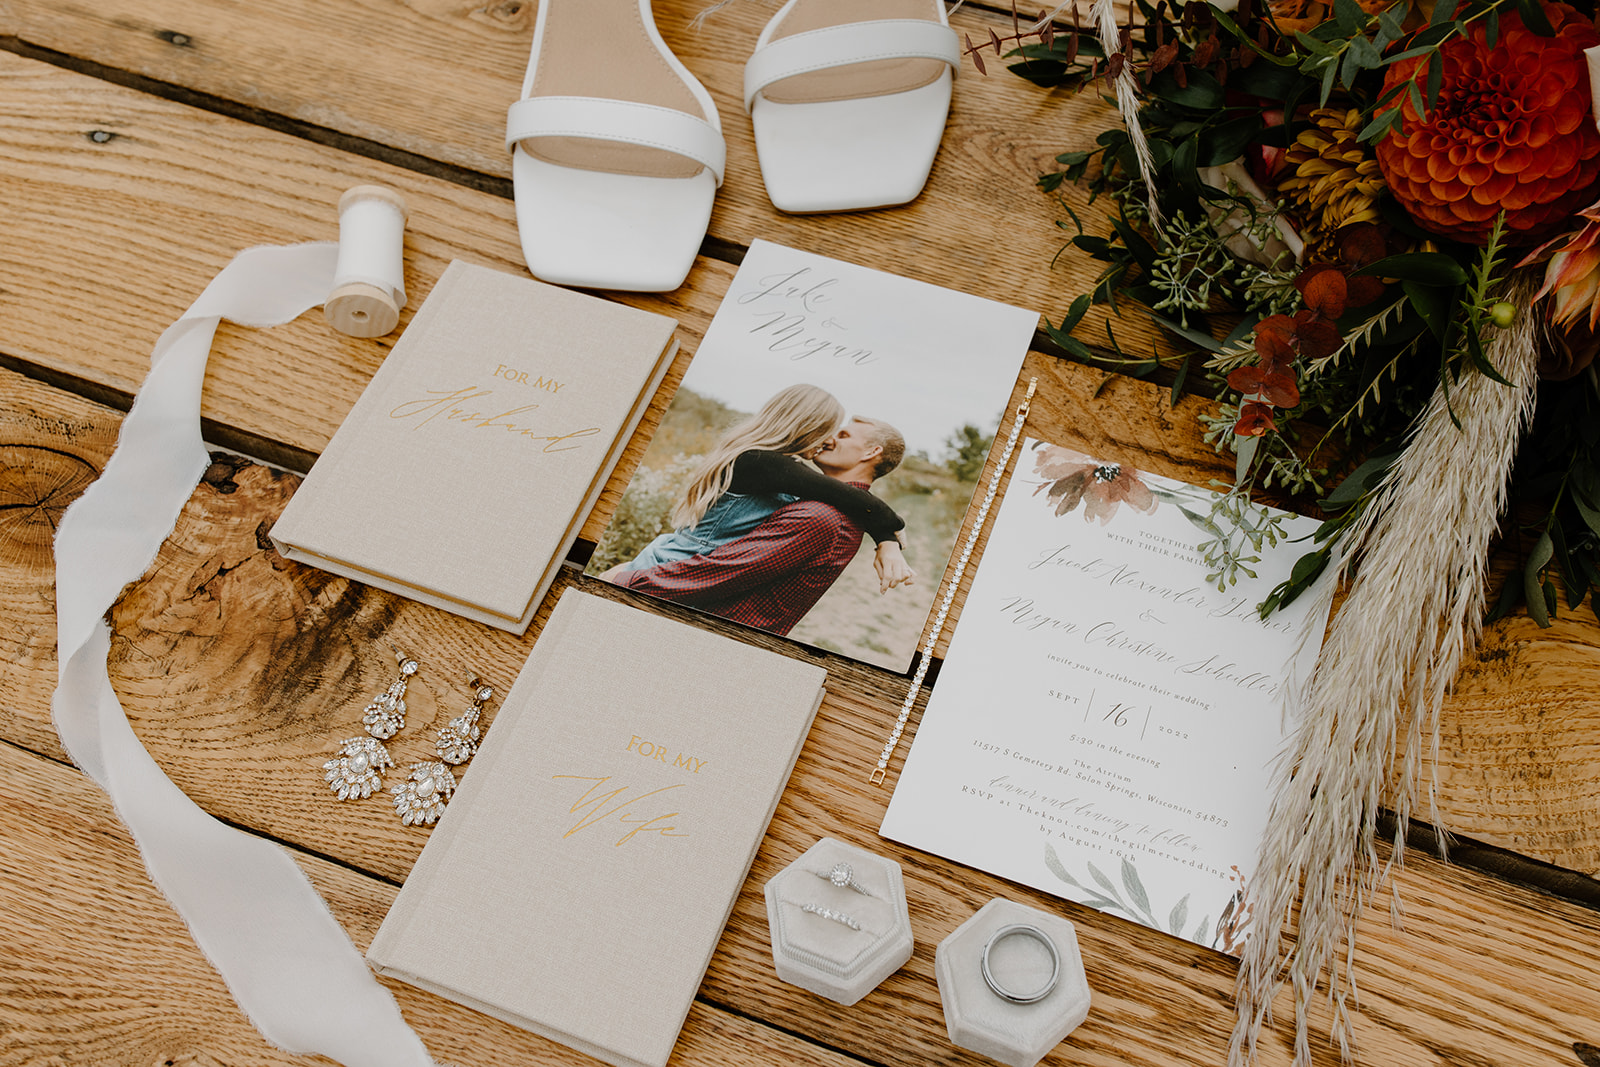 Wedding invitations, rings, and jewelry in a flat lay